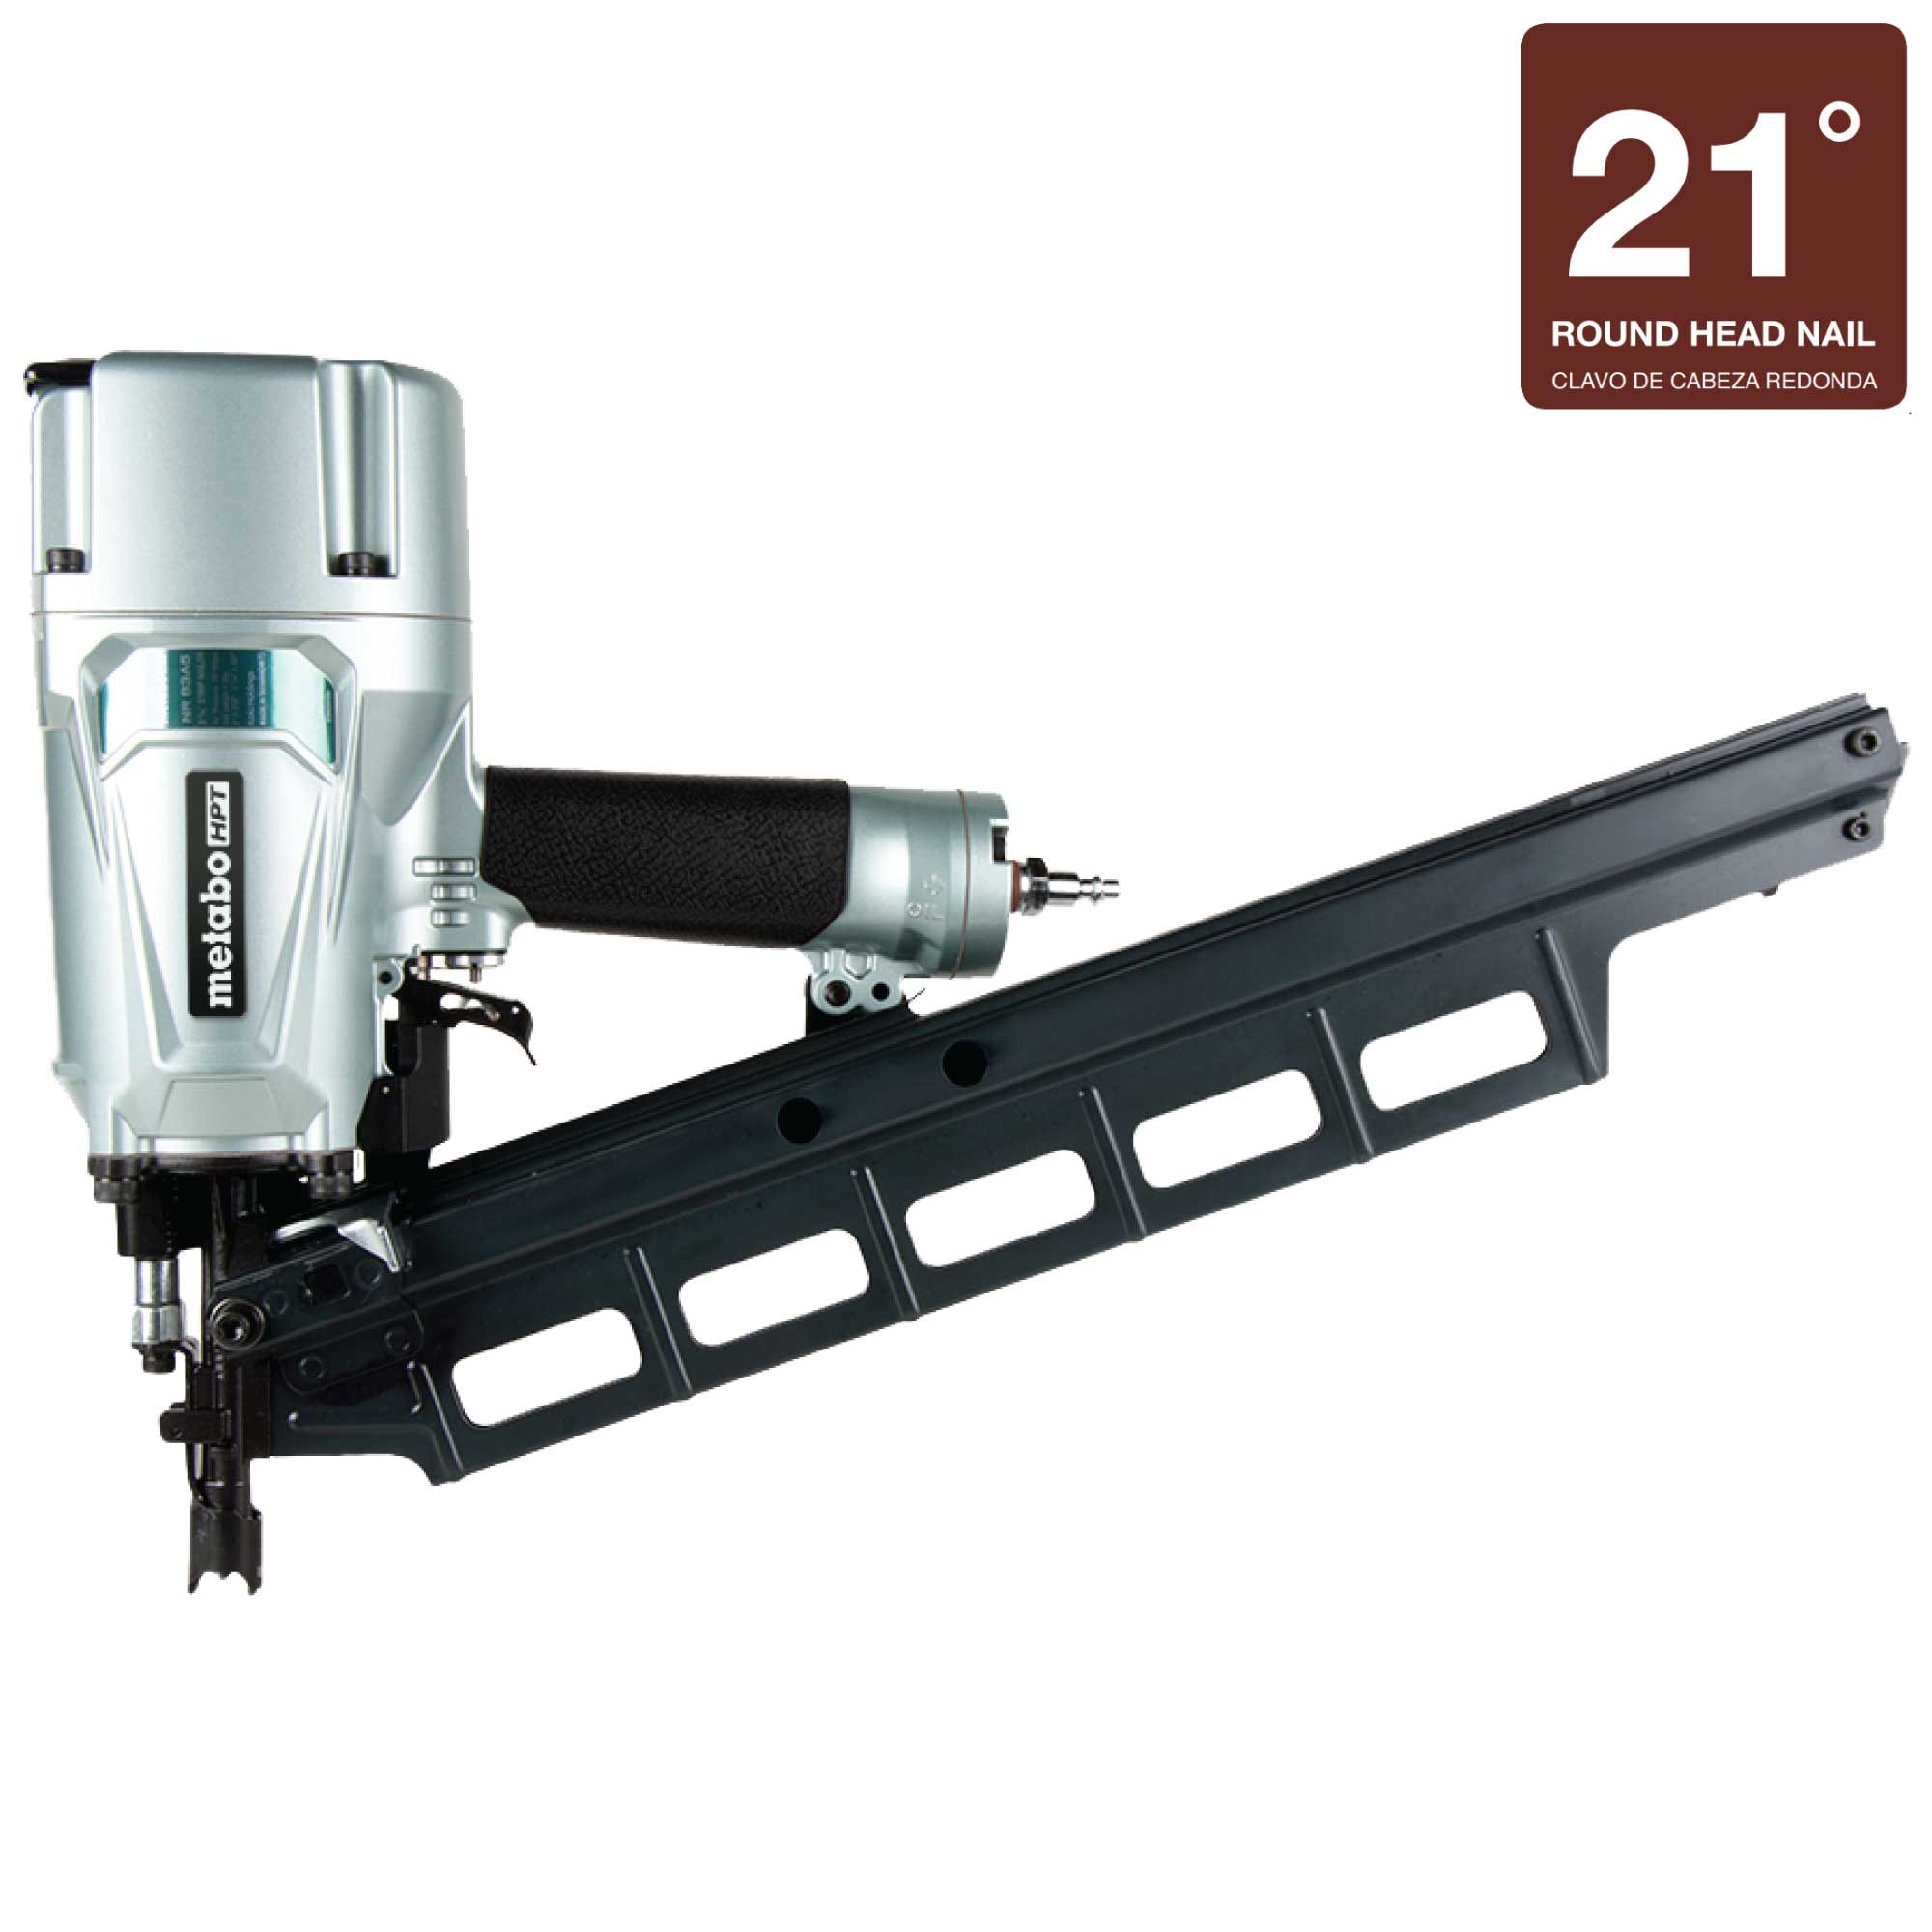 Metabo HPT 2.5-in 15-Gauge Cordless Finish Nailer at Lowes.com